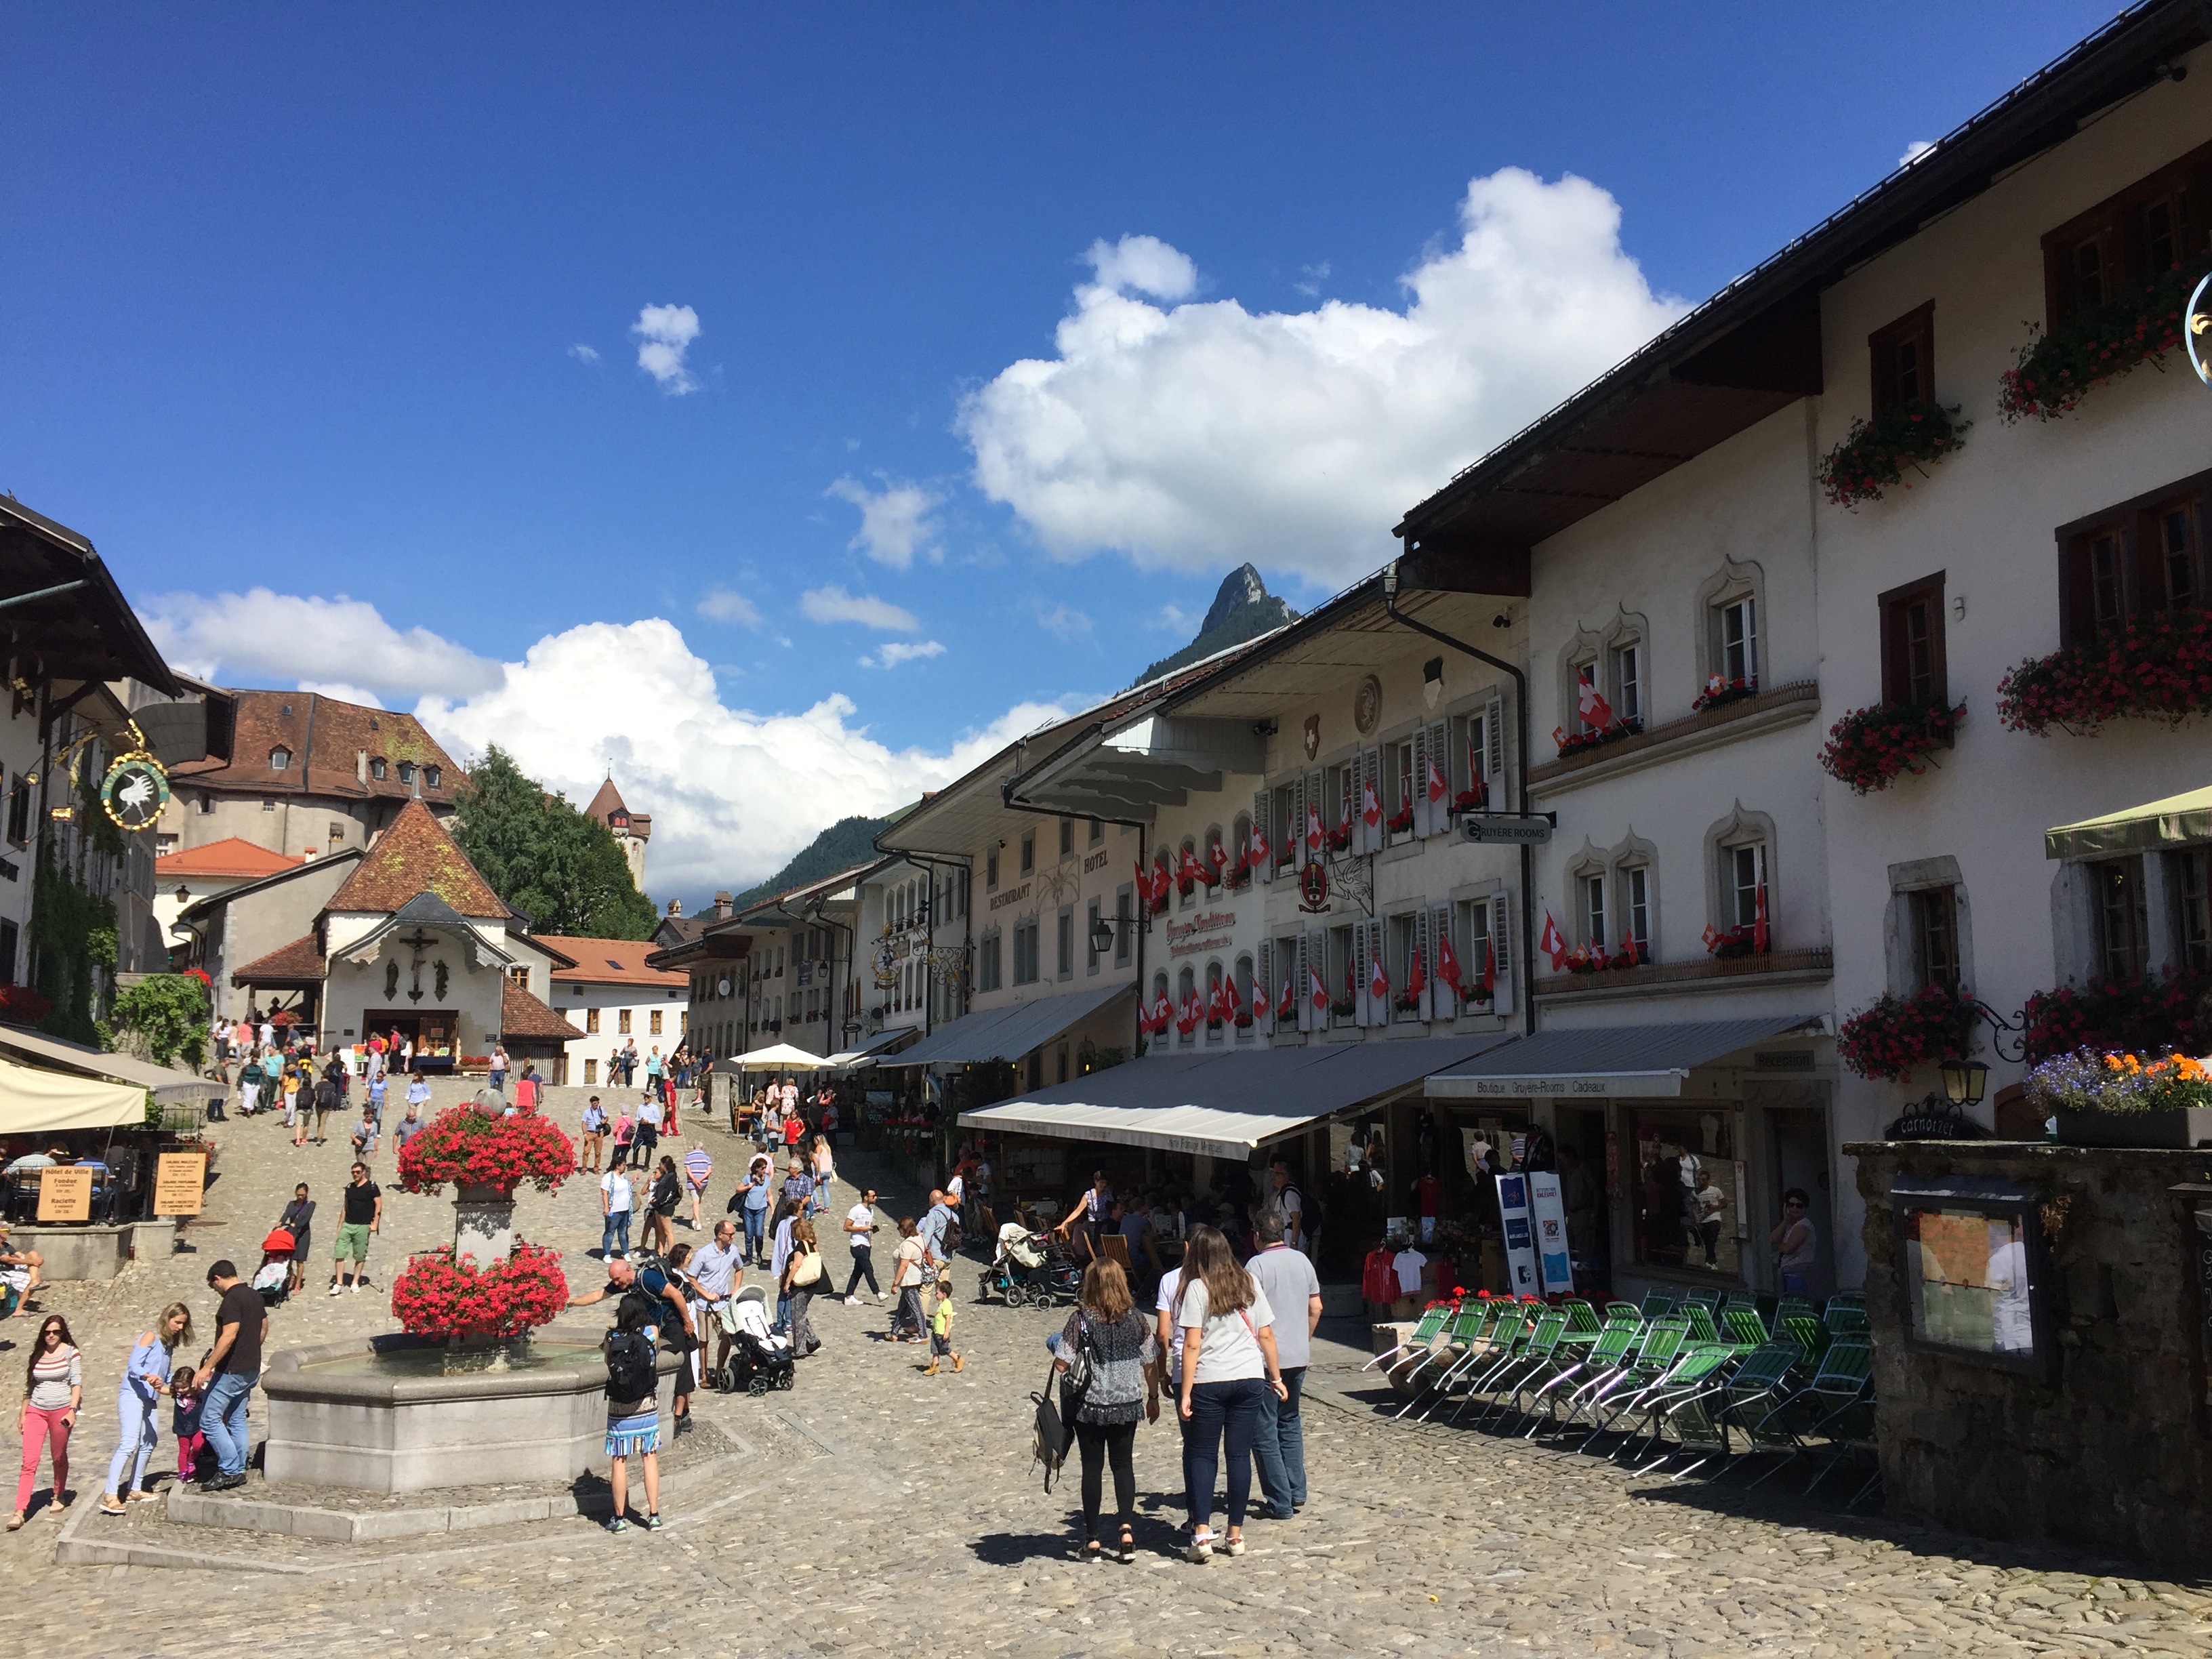 The main square of Gruyères